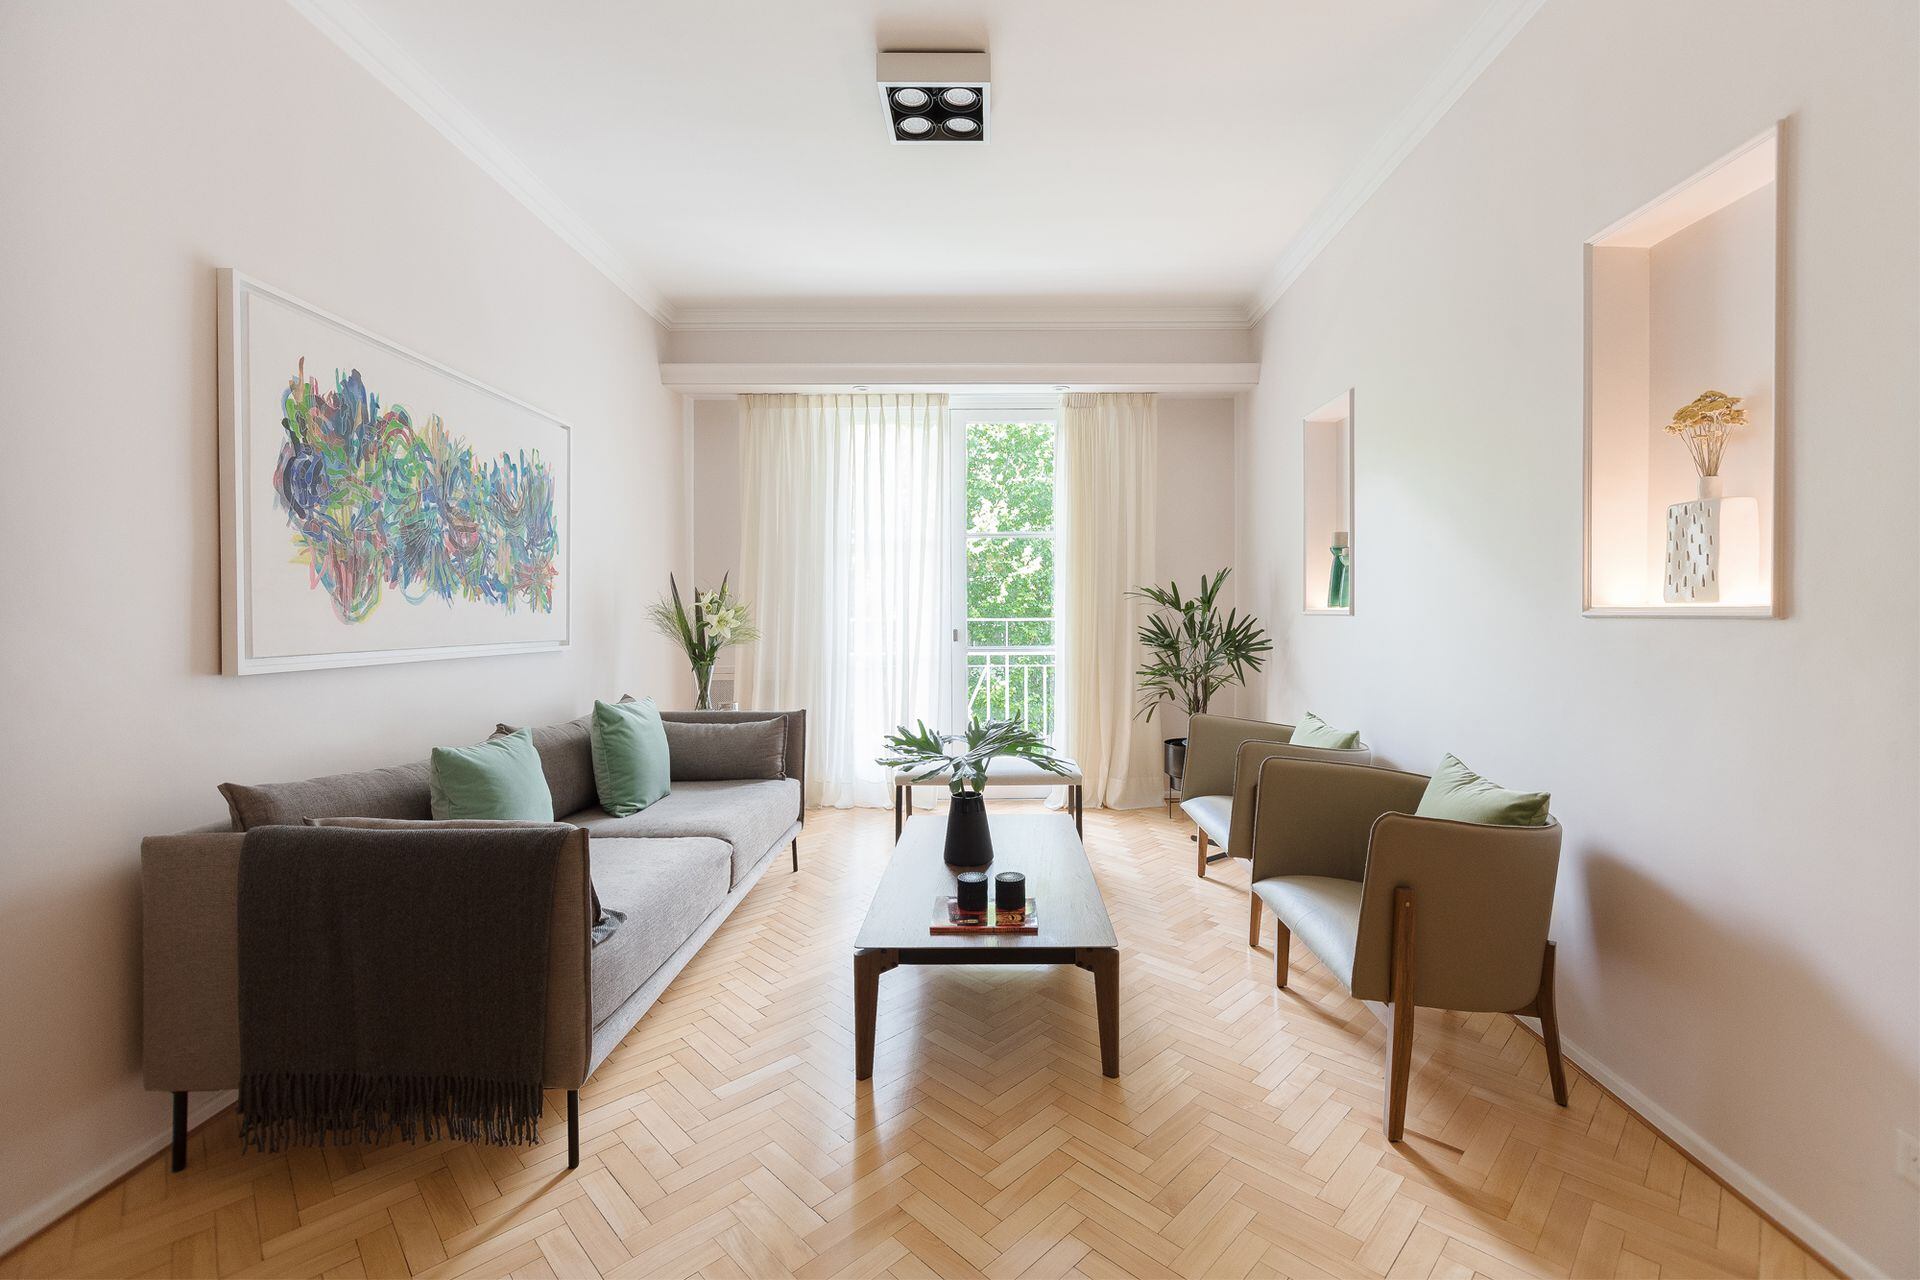 The parquet floors (La Alemangia) were polished and hydro-lacquered and a light spot (Electricidad Arev) was incorporated.  Sofa (Fifth House).